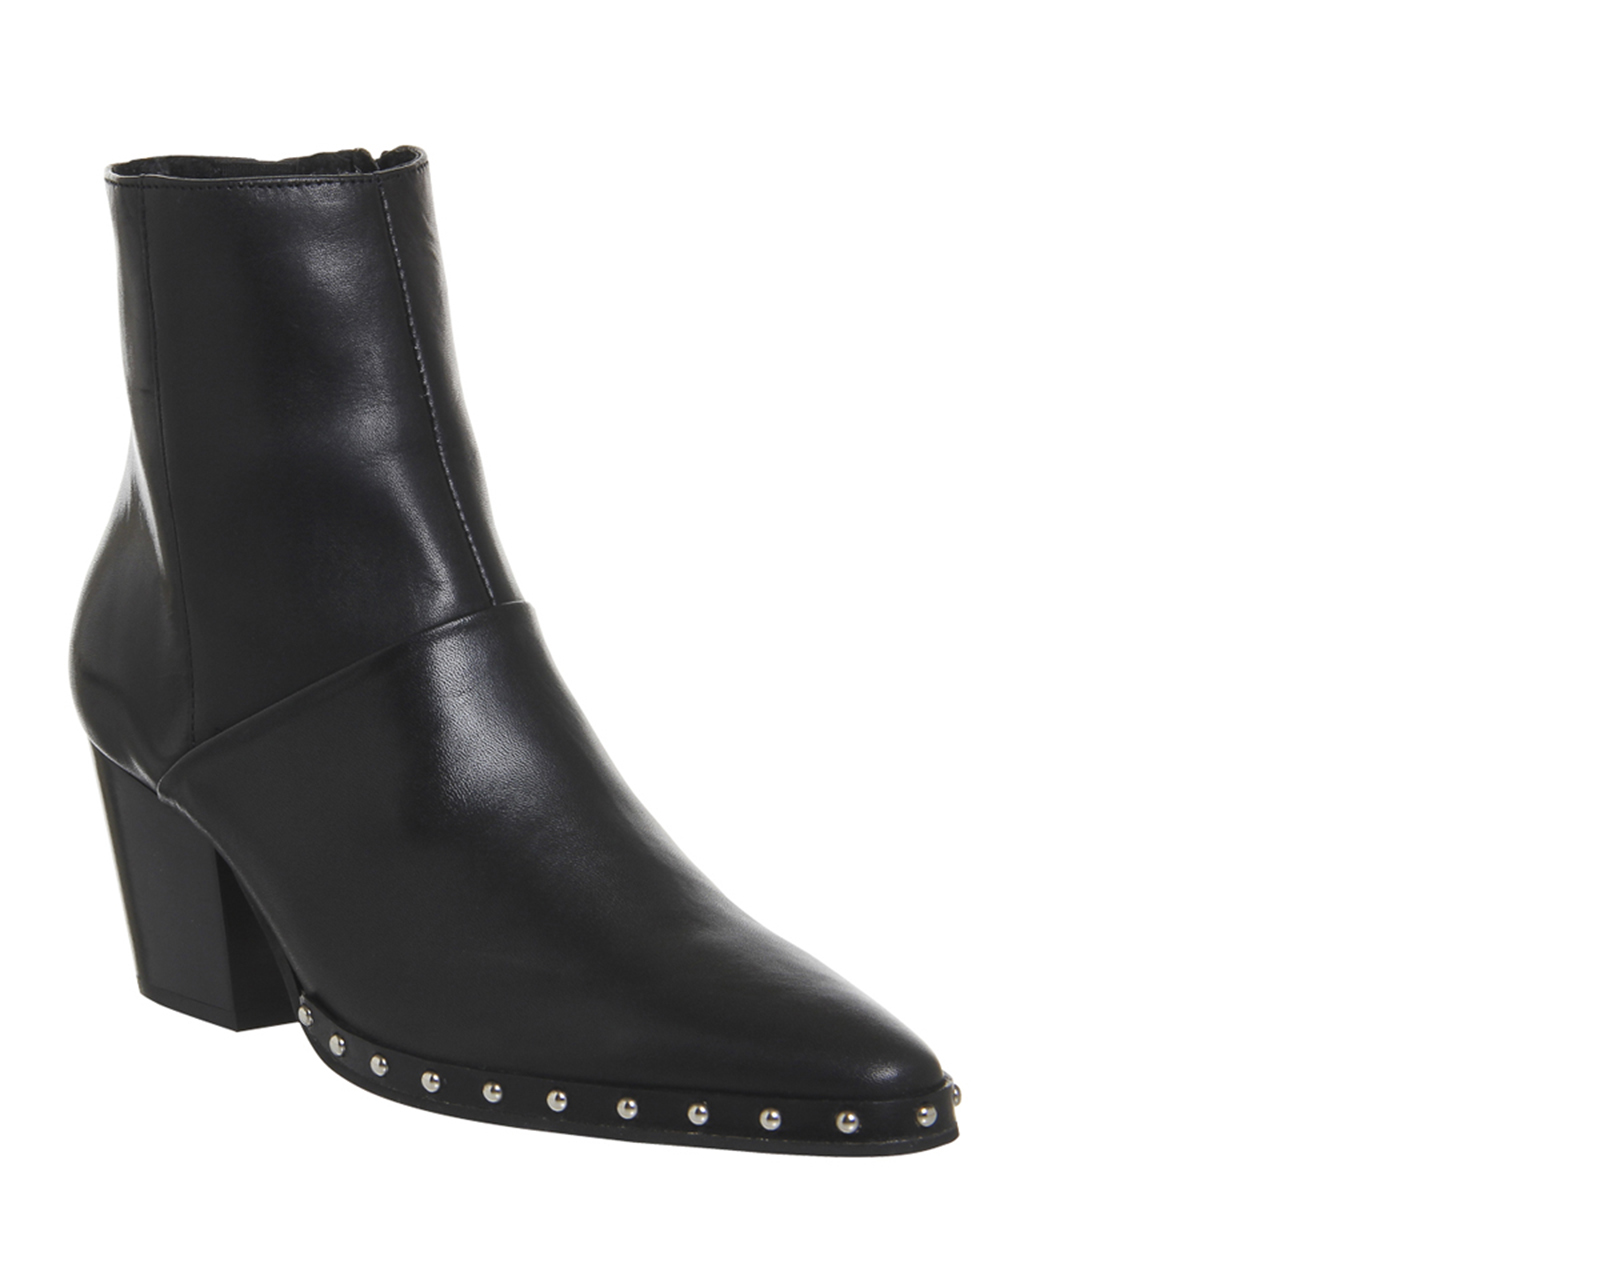 OFFICELevi Western BootsBlack Leather With Studs